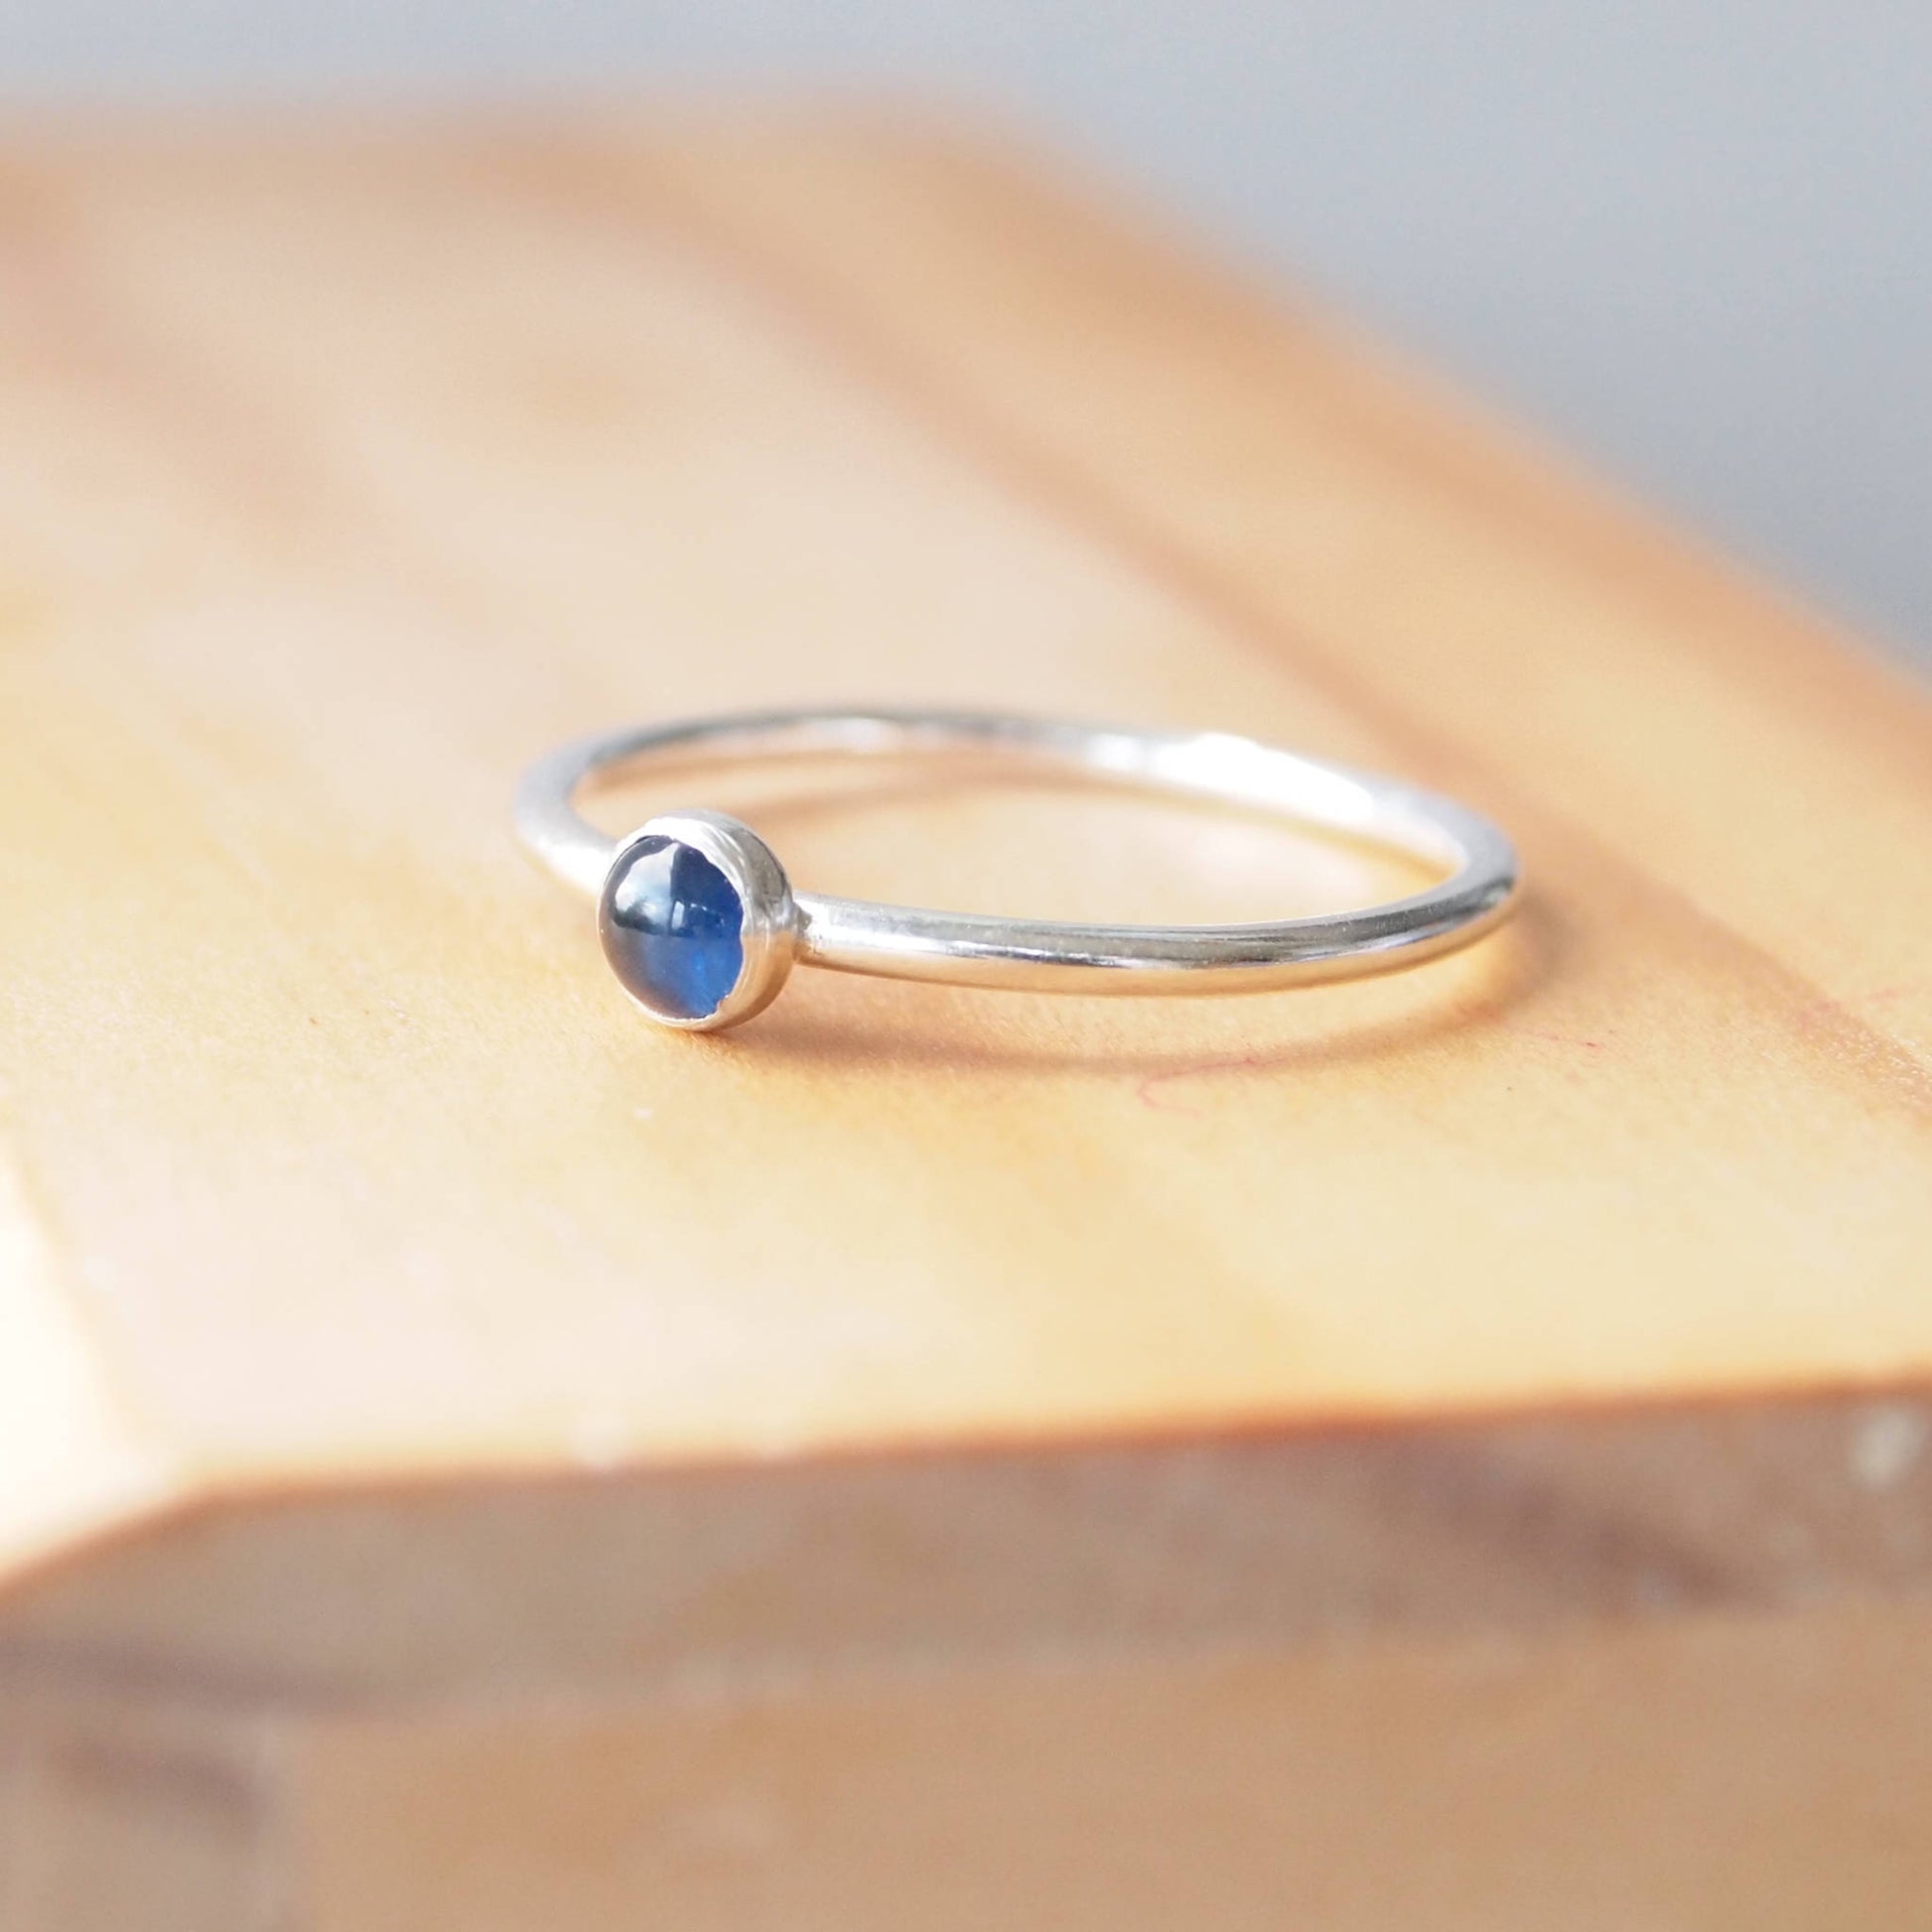 Simple Solitaire ring with a genuine Sapphire gemstone. The ring is made from Sterling Silver and a round natural sapphire measuring 4mm in size. It is set onto a modern ring with a fully round profile. The ring is handmade to your ring size  by maram jewellery in Scotland UK